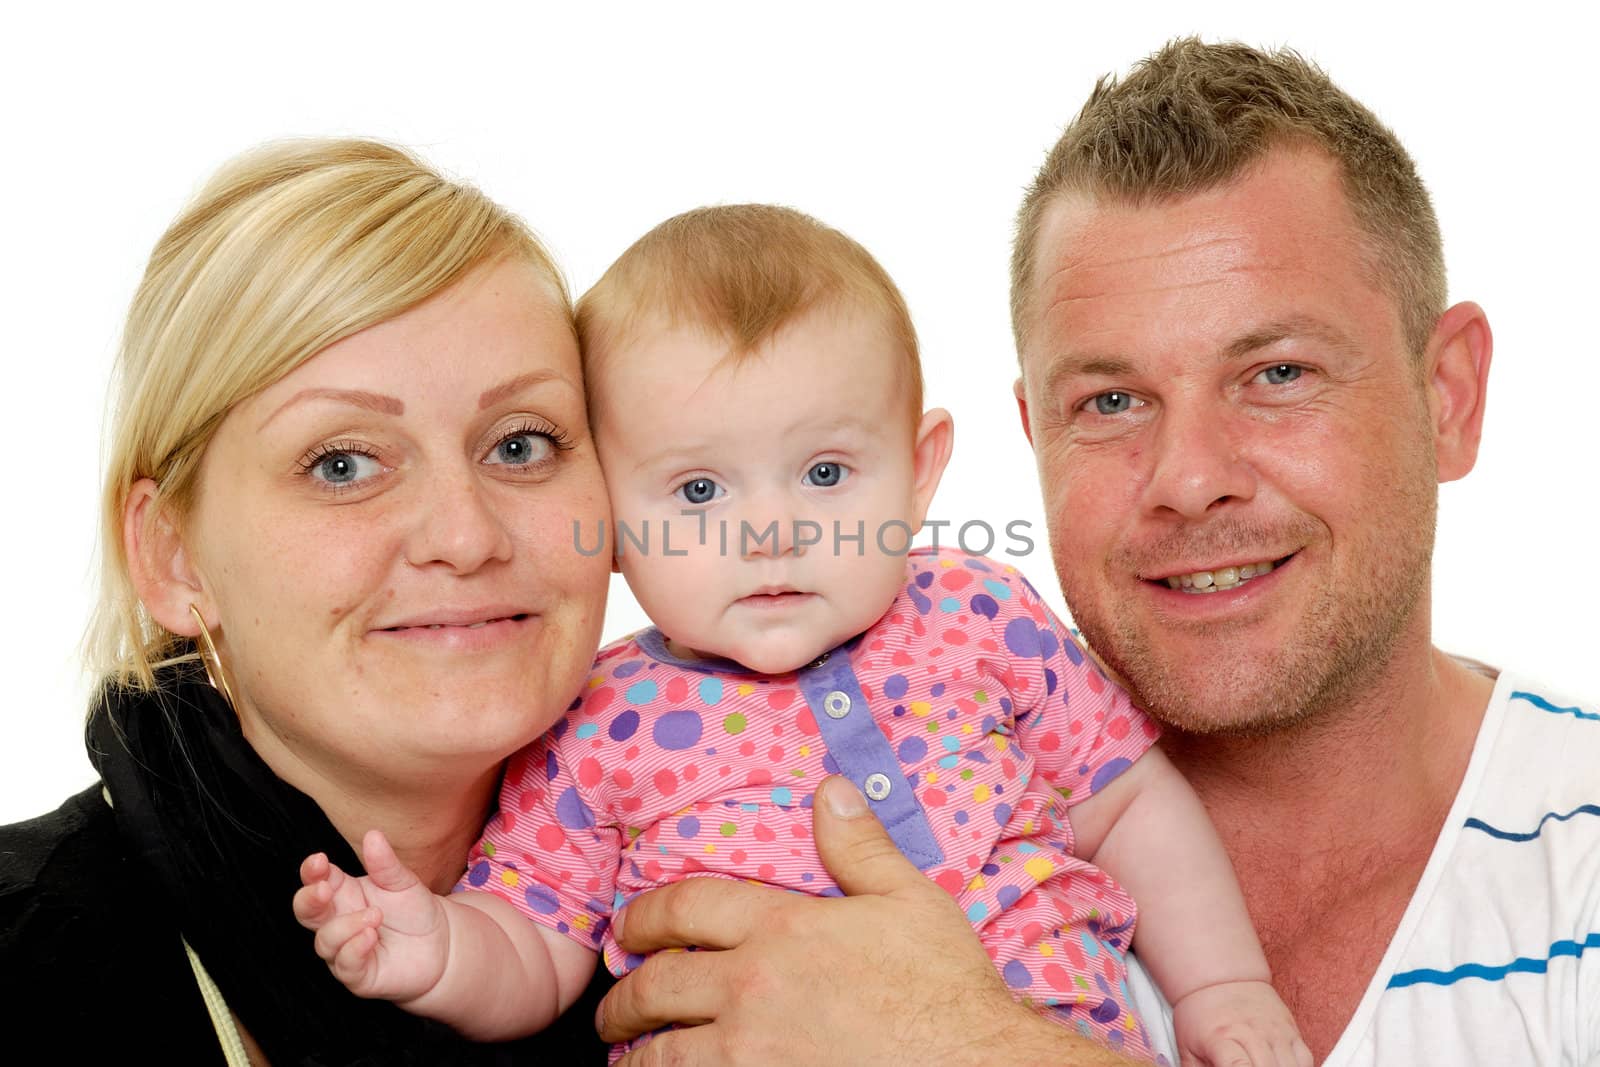 Happy family. Mother and father are looking at their sweet smiling 4 month old baby.